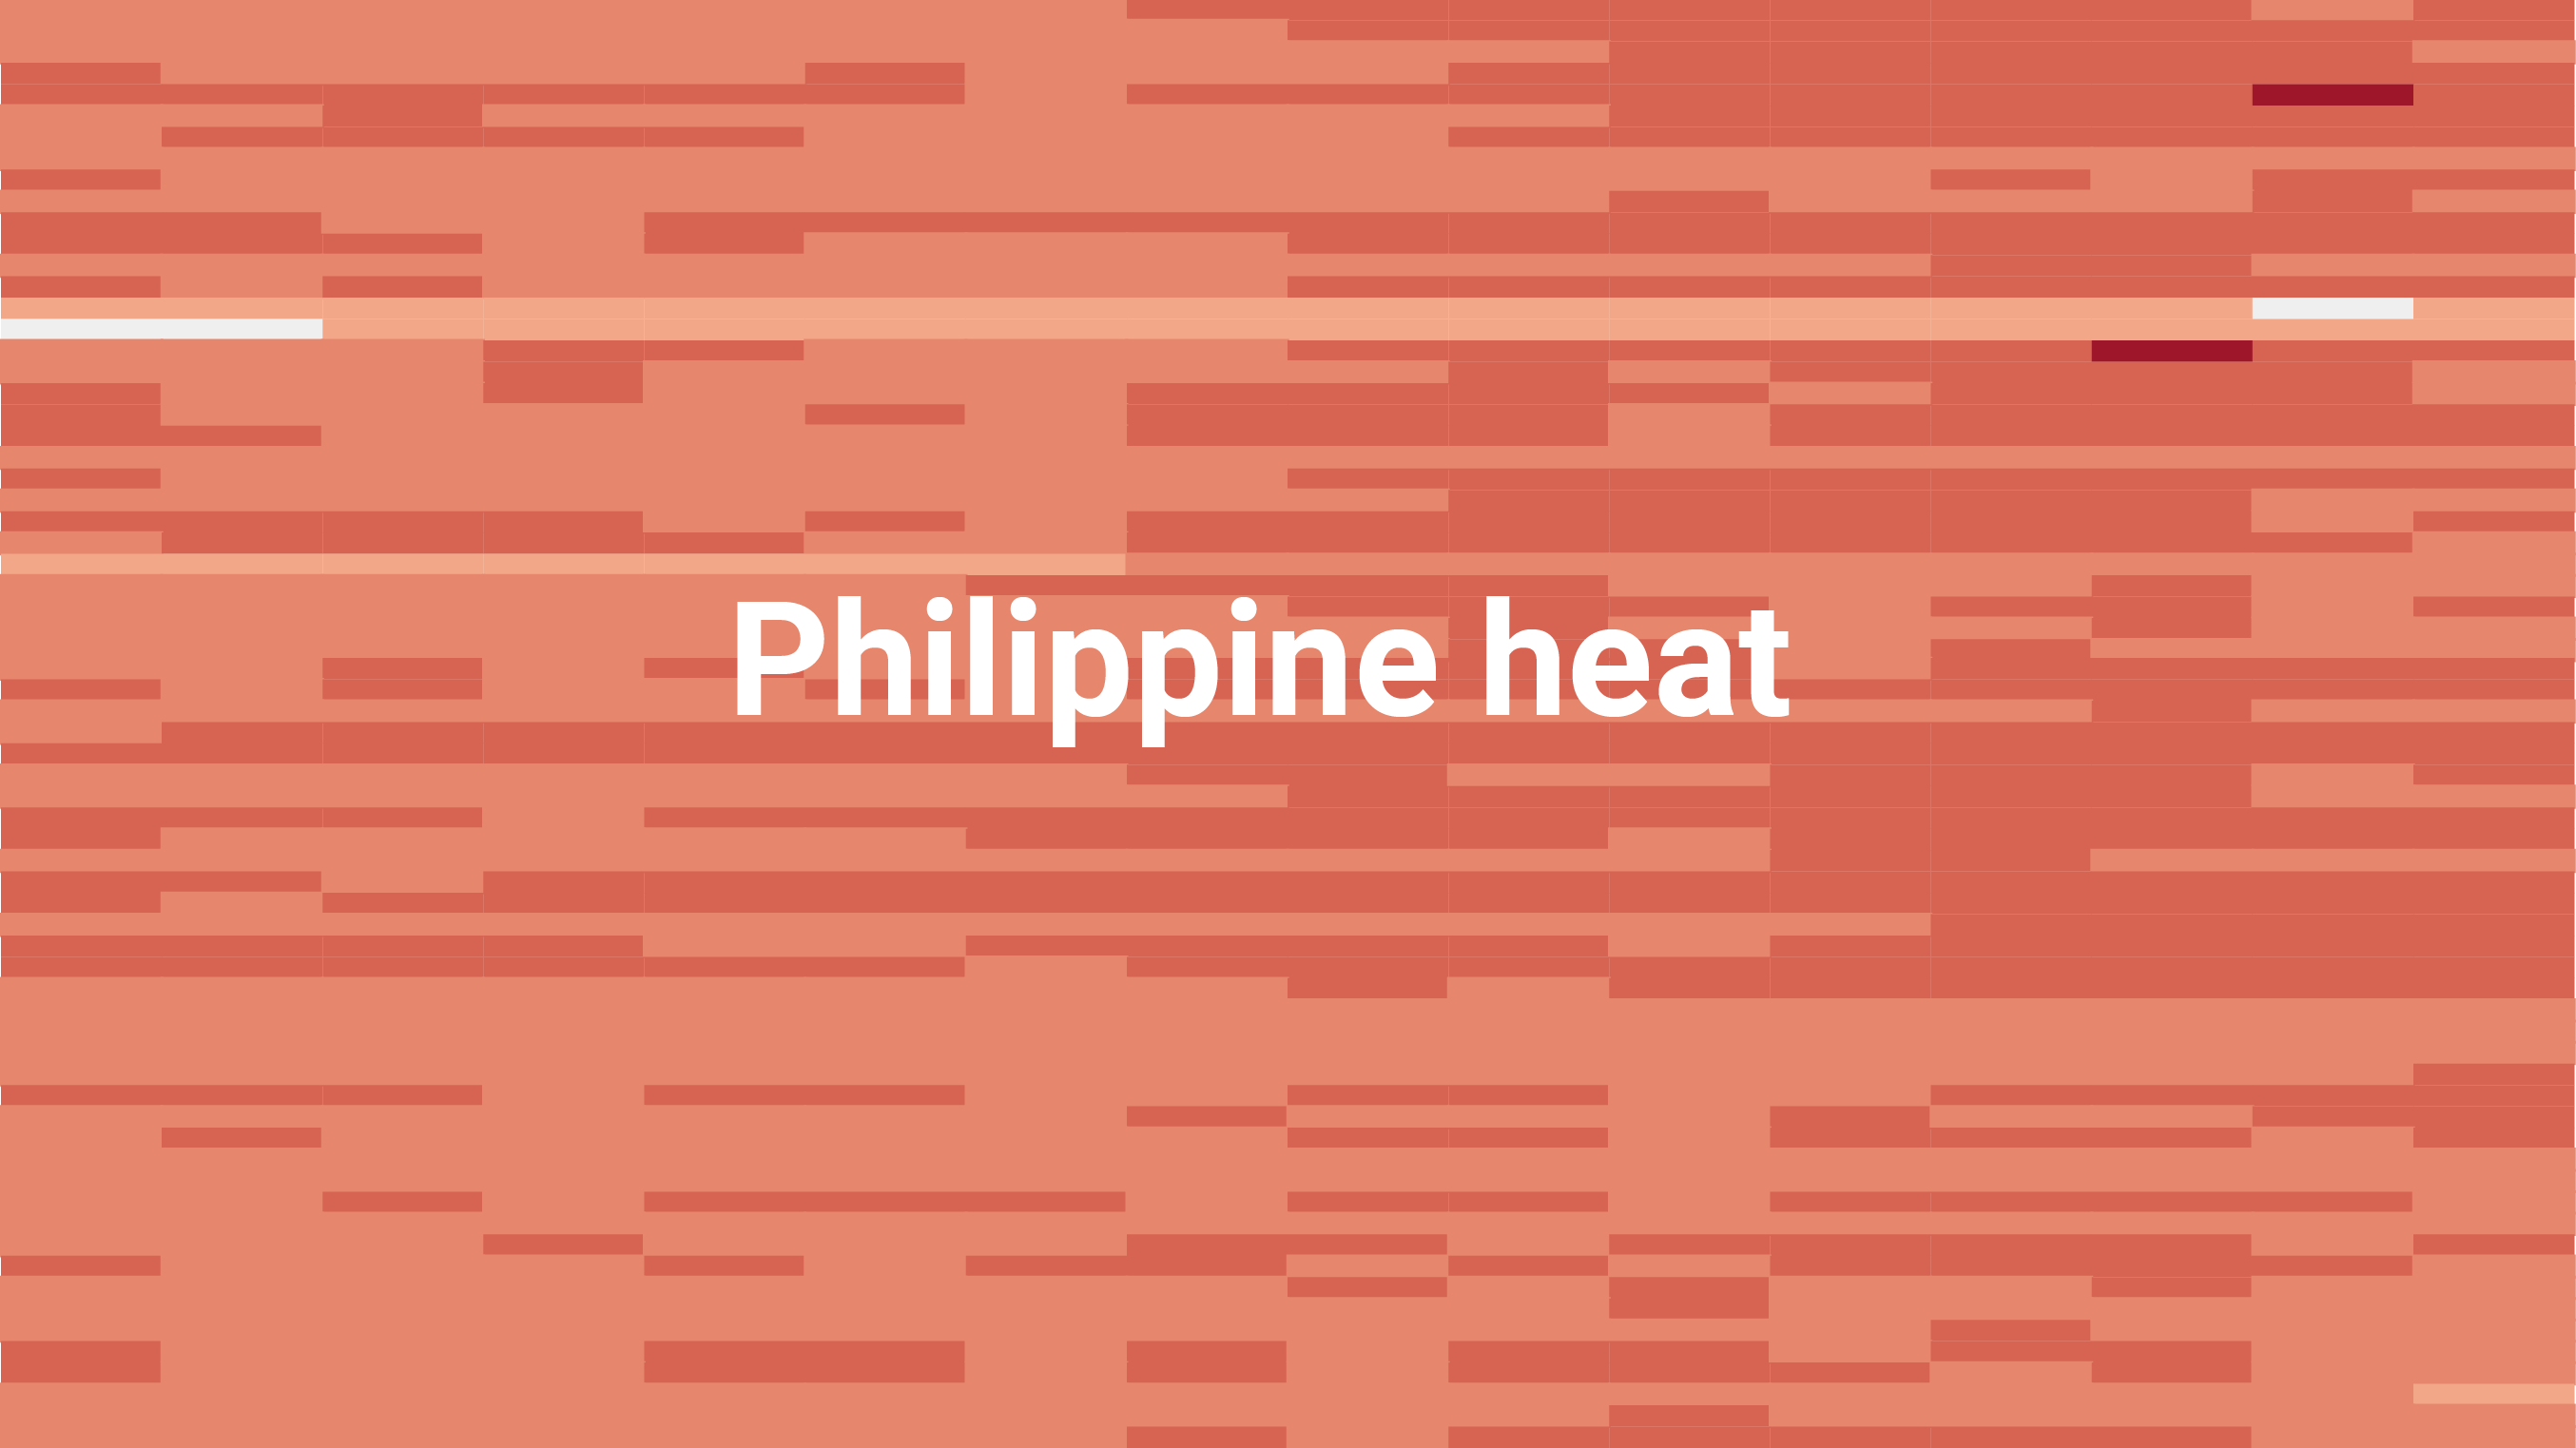 A title page cover that reads 'Philippine heat' against a heatmap background